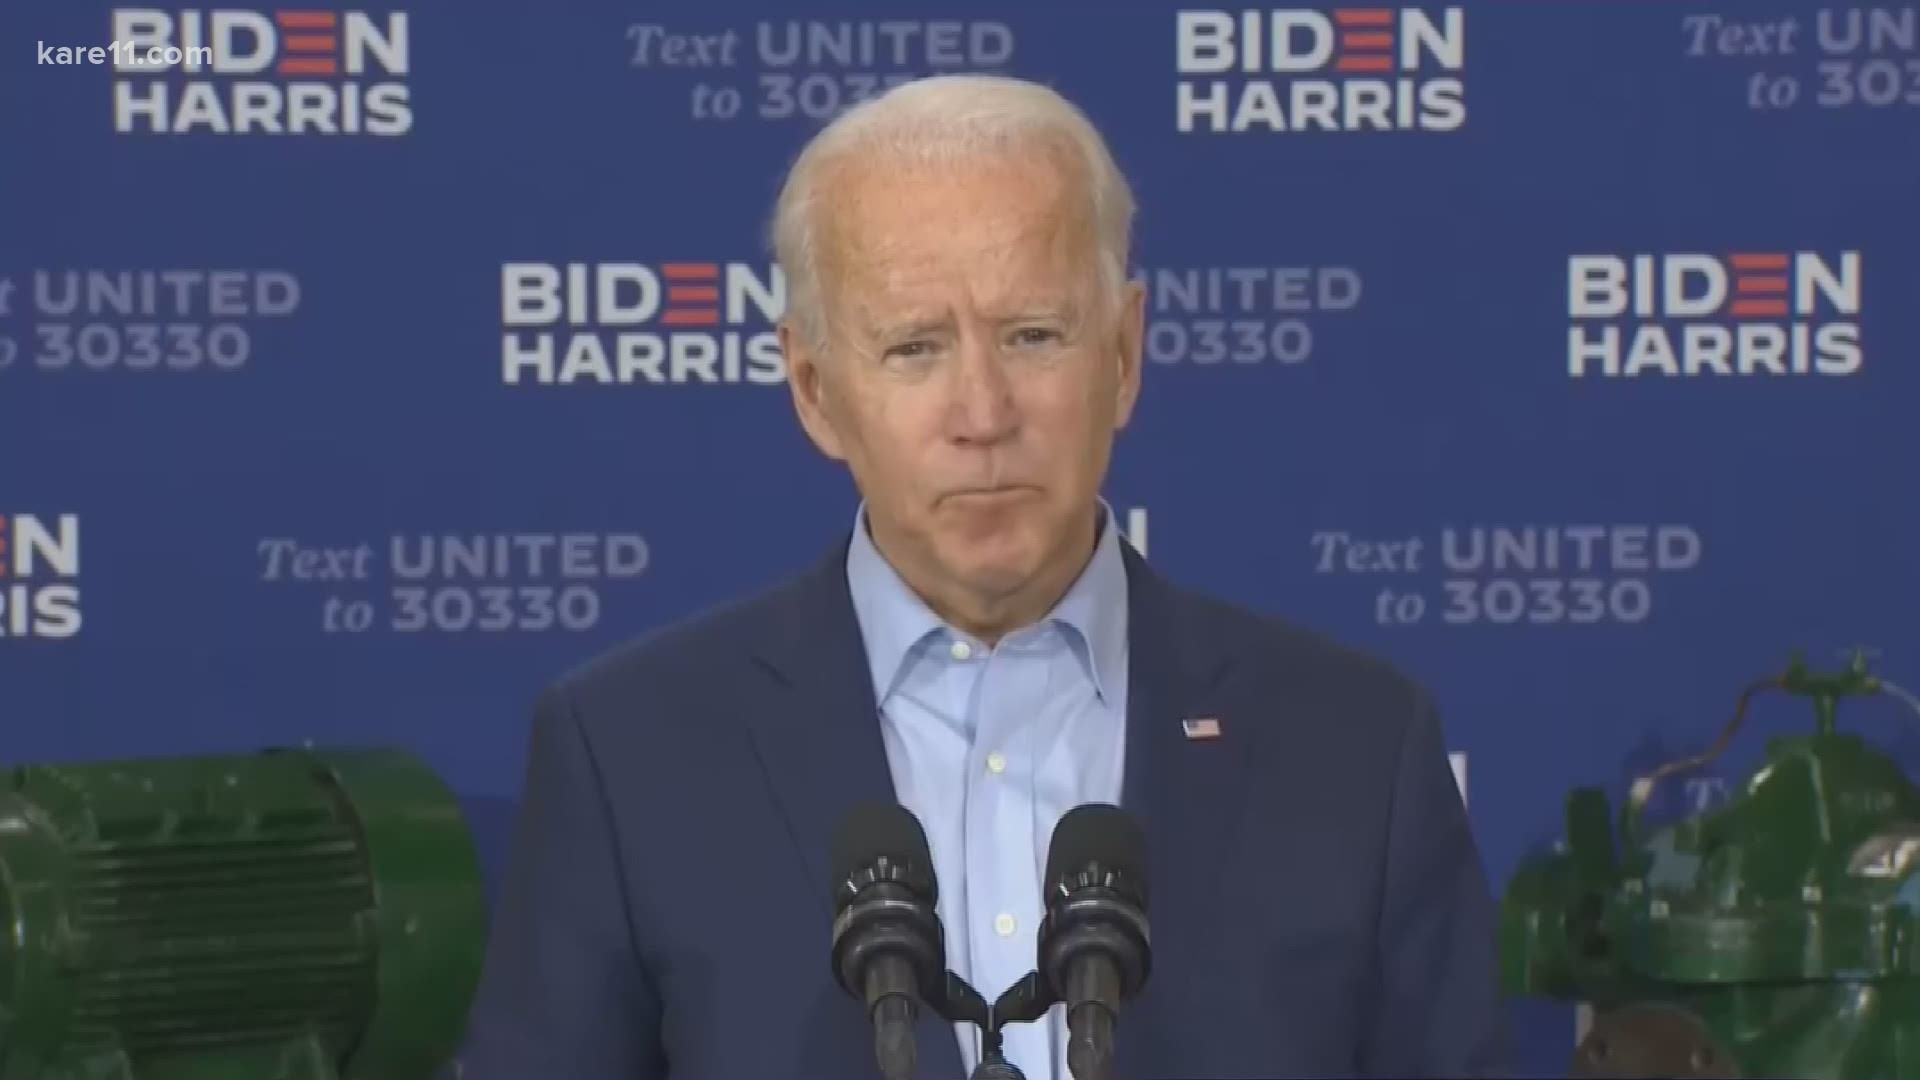 Democratic presidential candidate and former VP Joe Biden made a campaign stop near Duluth, hours ahead of President Trump's visit to Bemidji